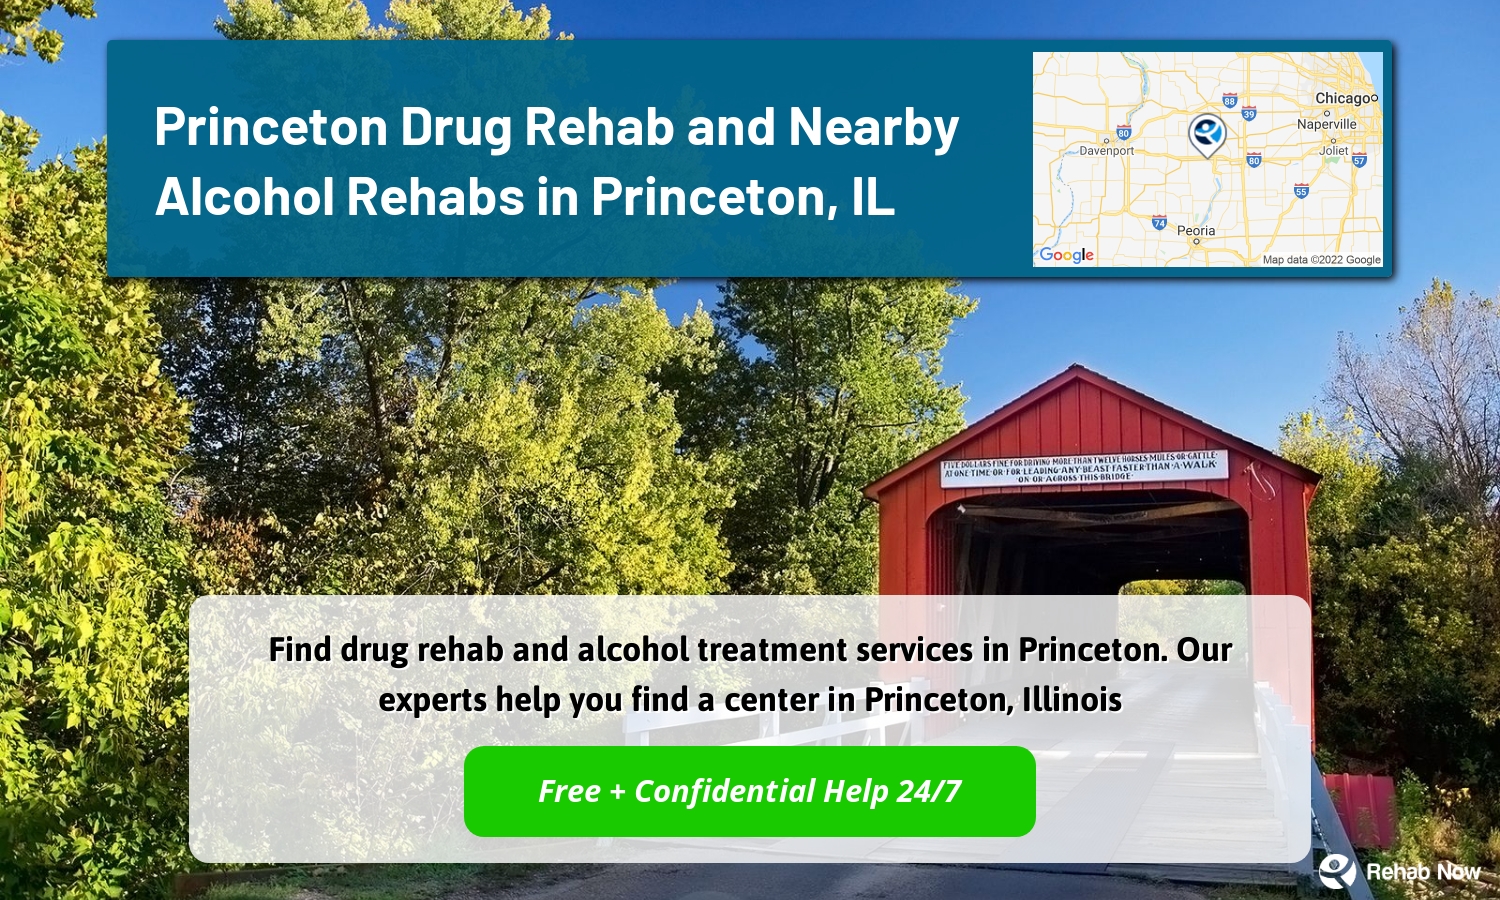 Find drug rehab and alcohol treatment services in Princeton. Our experts help you find a center in Princeton, Illinois